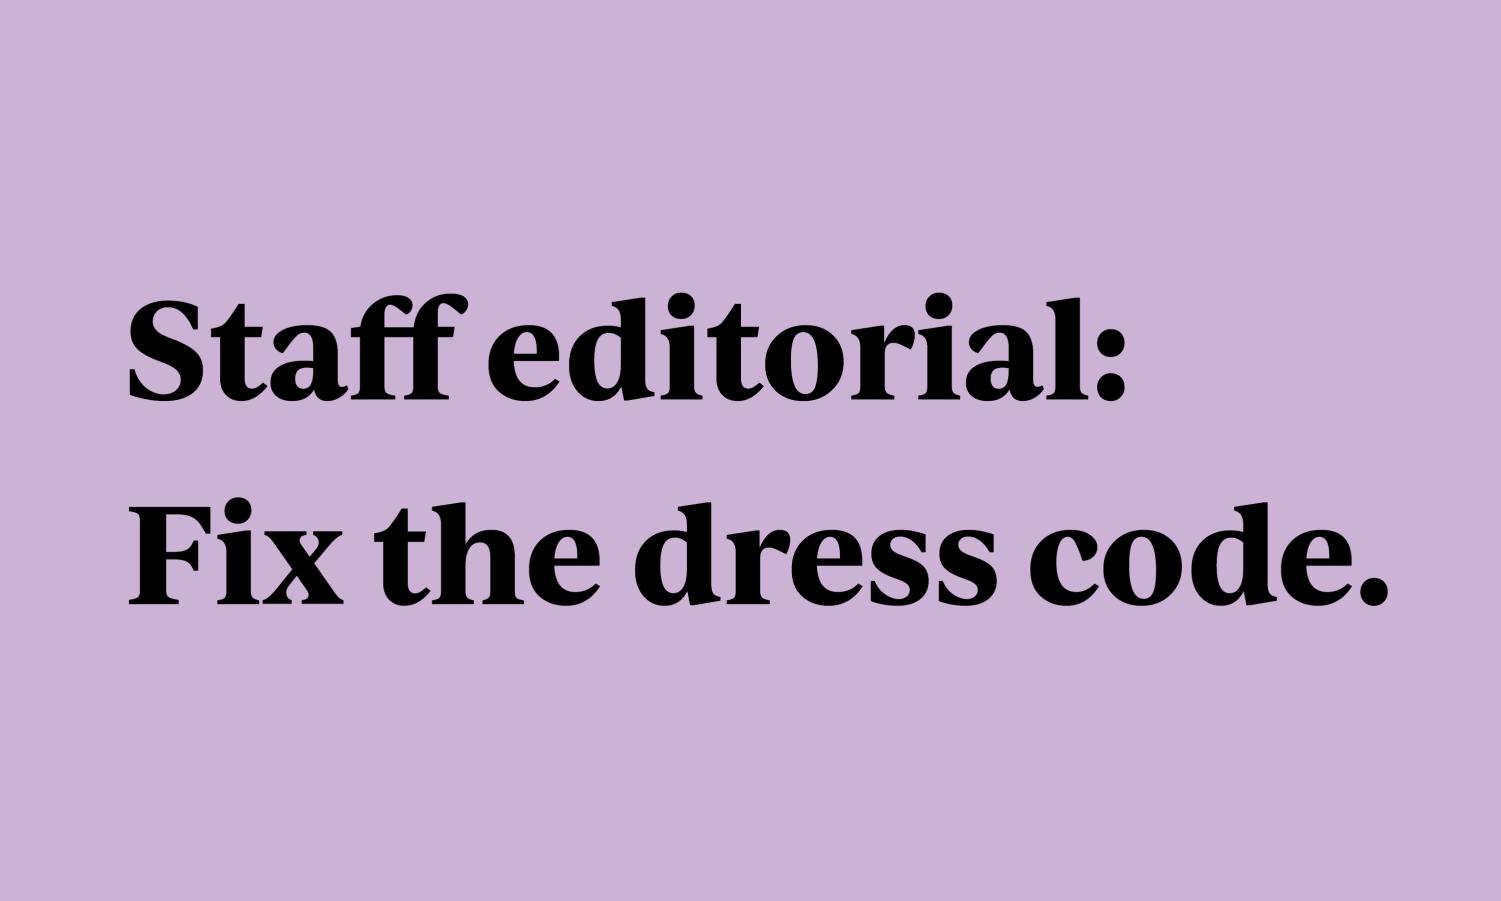 New dress code policies discriminate against females, stereotype males